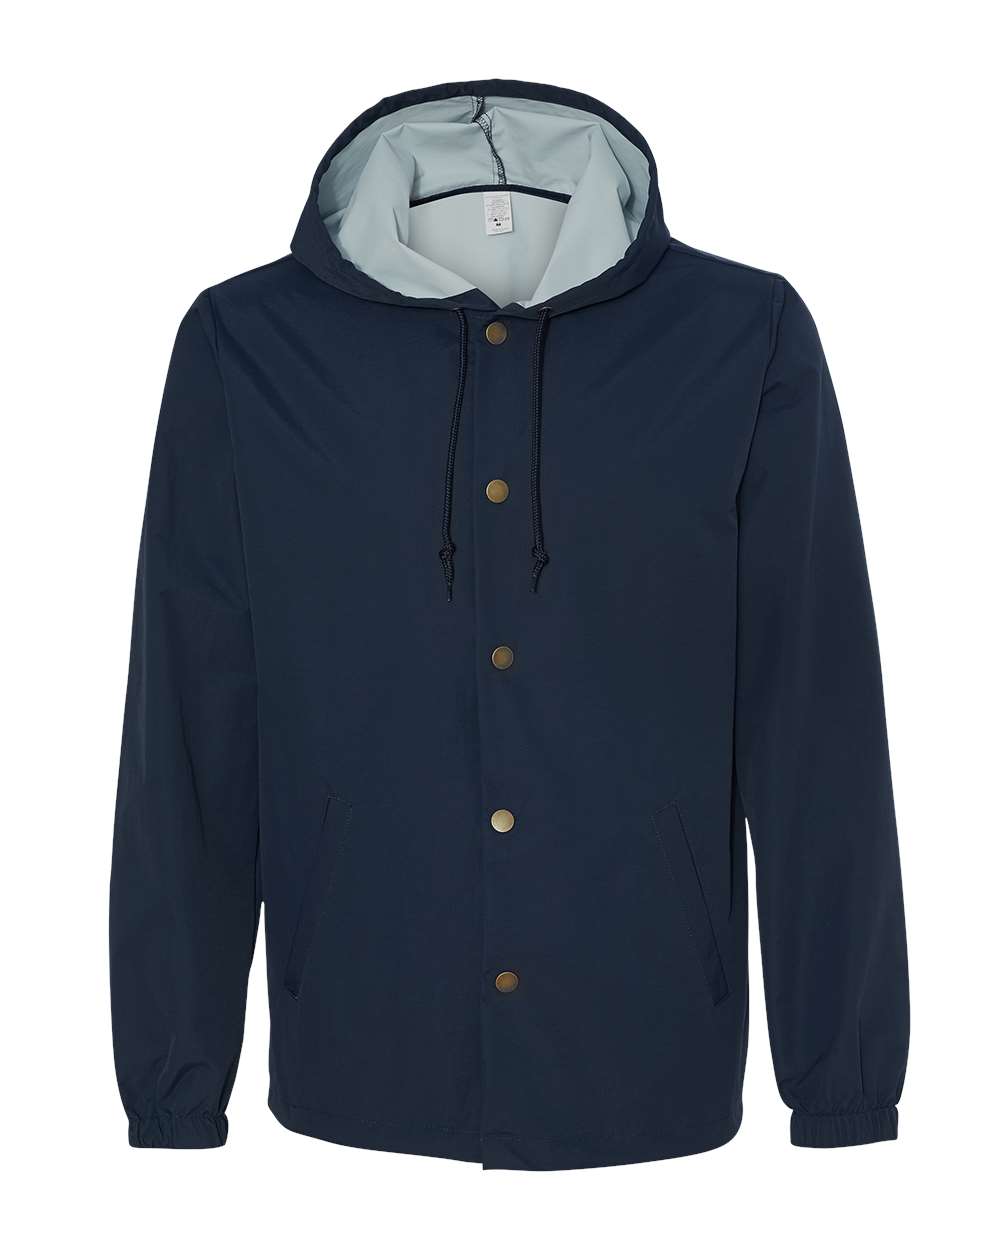 independent trading co hooded windbreaker coachs jacket classic navy